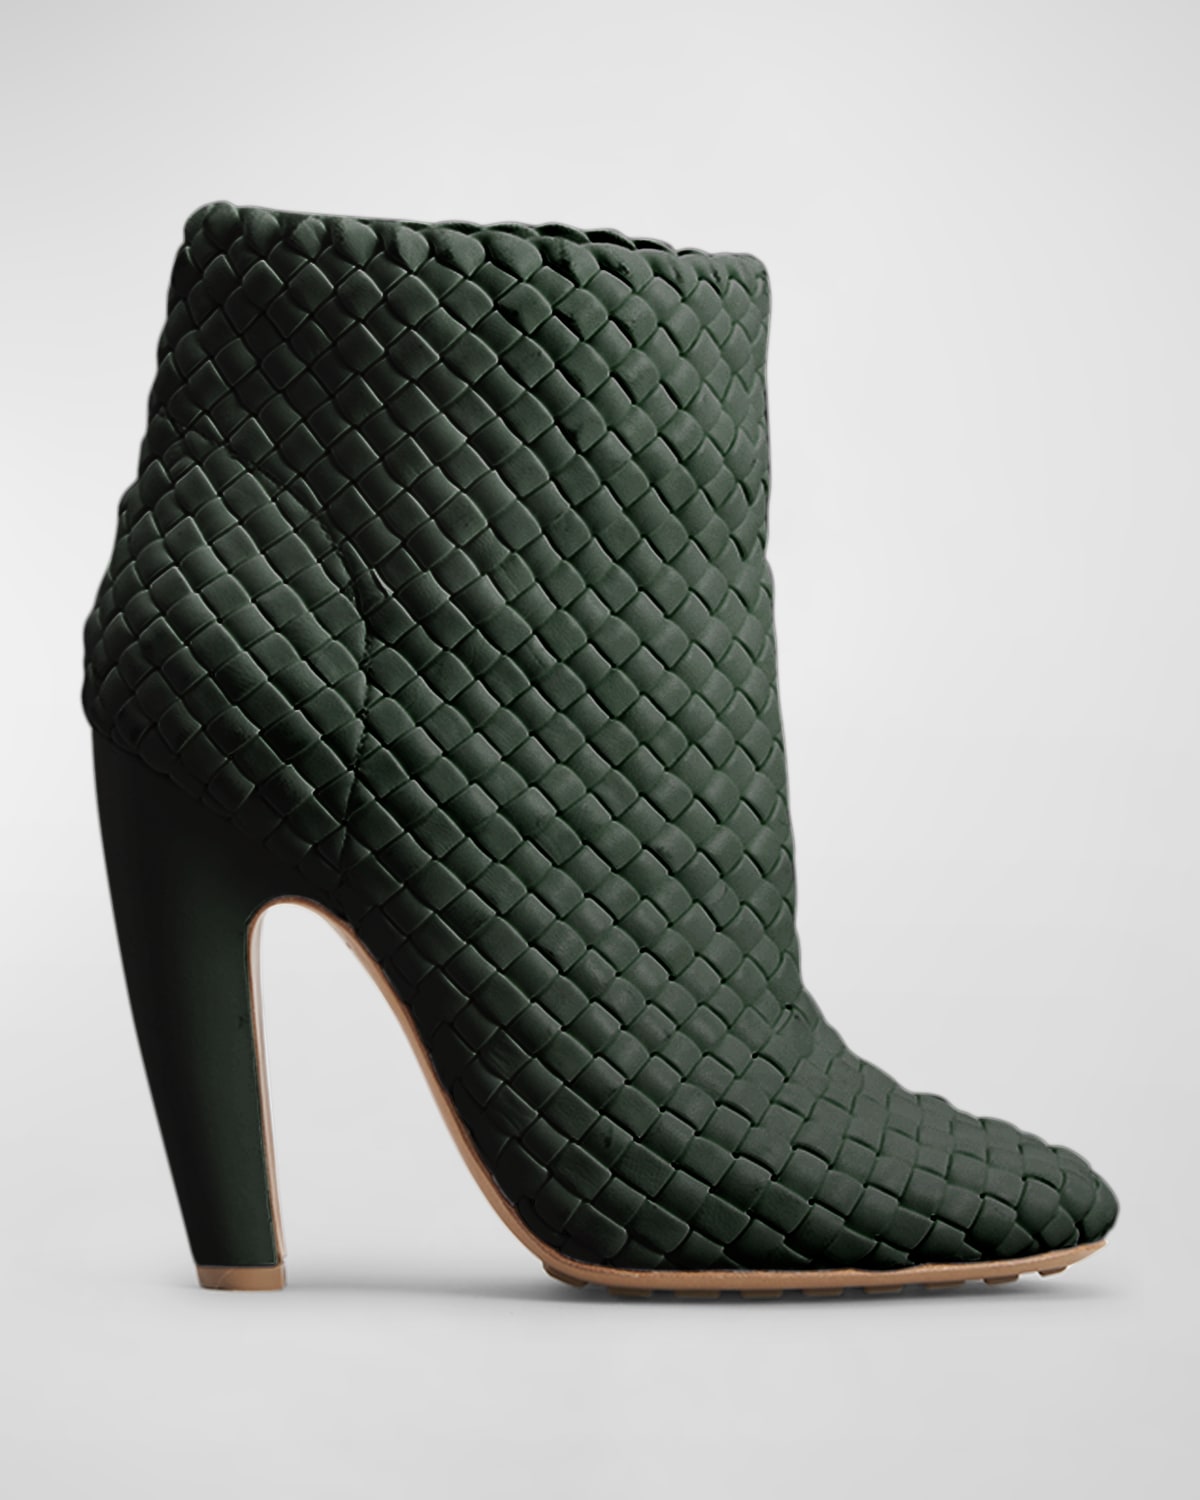 Lido Woven Leather Ankle Boots